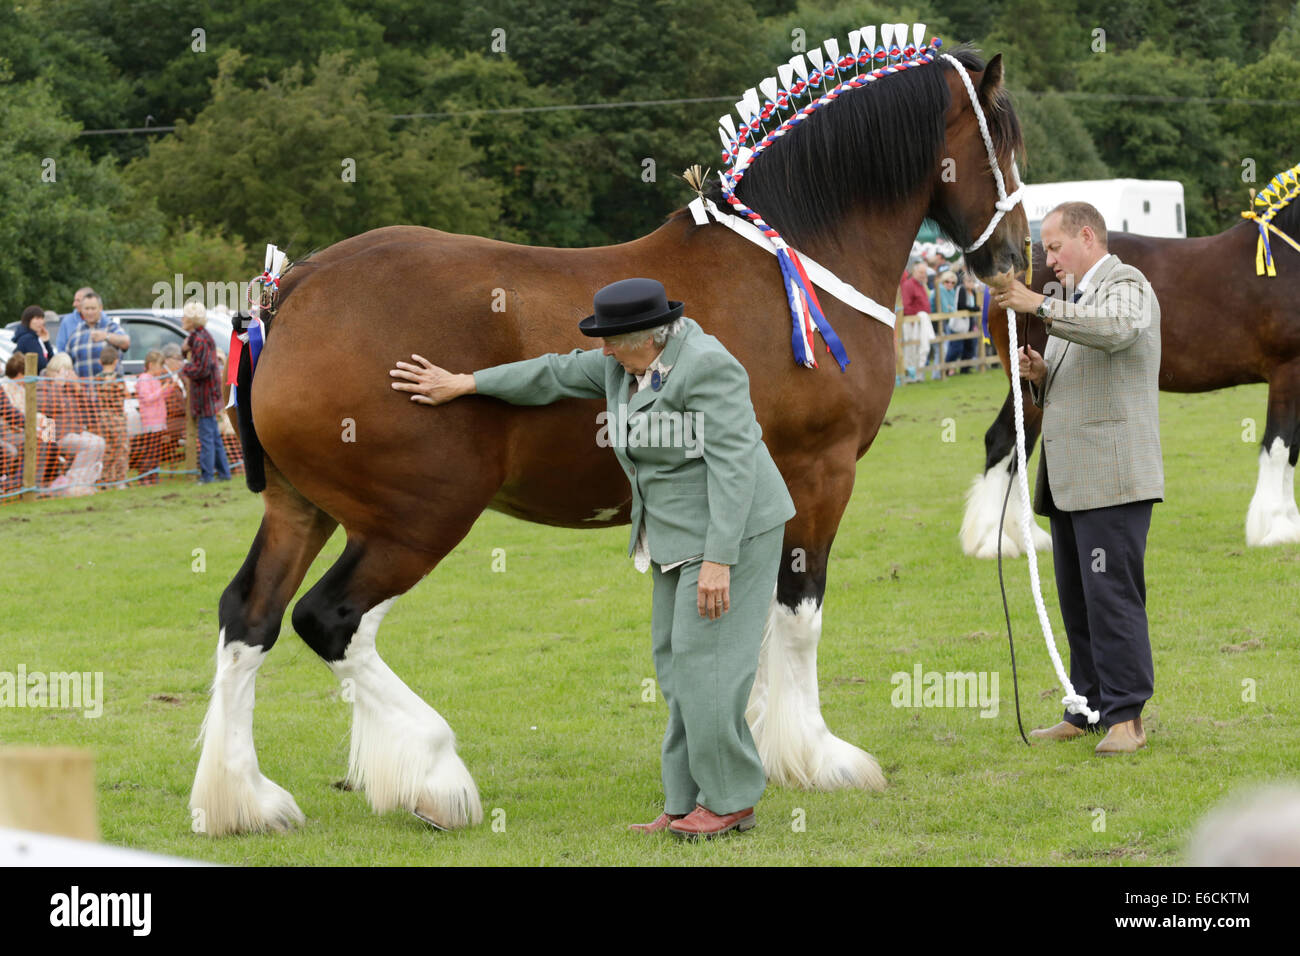 Rosedale Show 2014 The North York Moors England Stock Photo